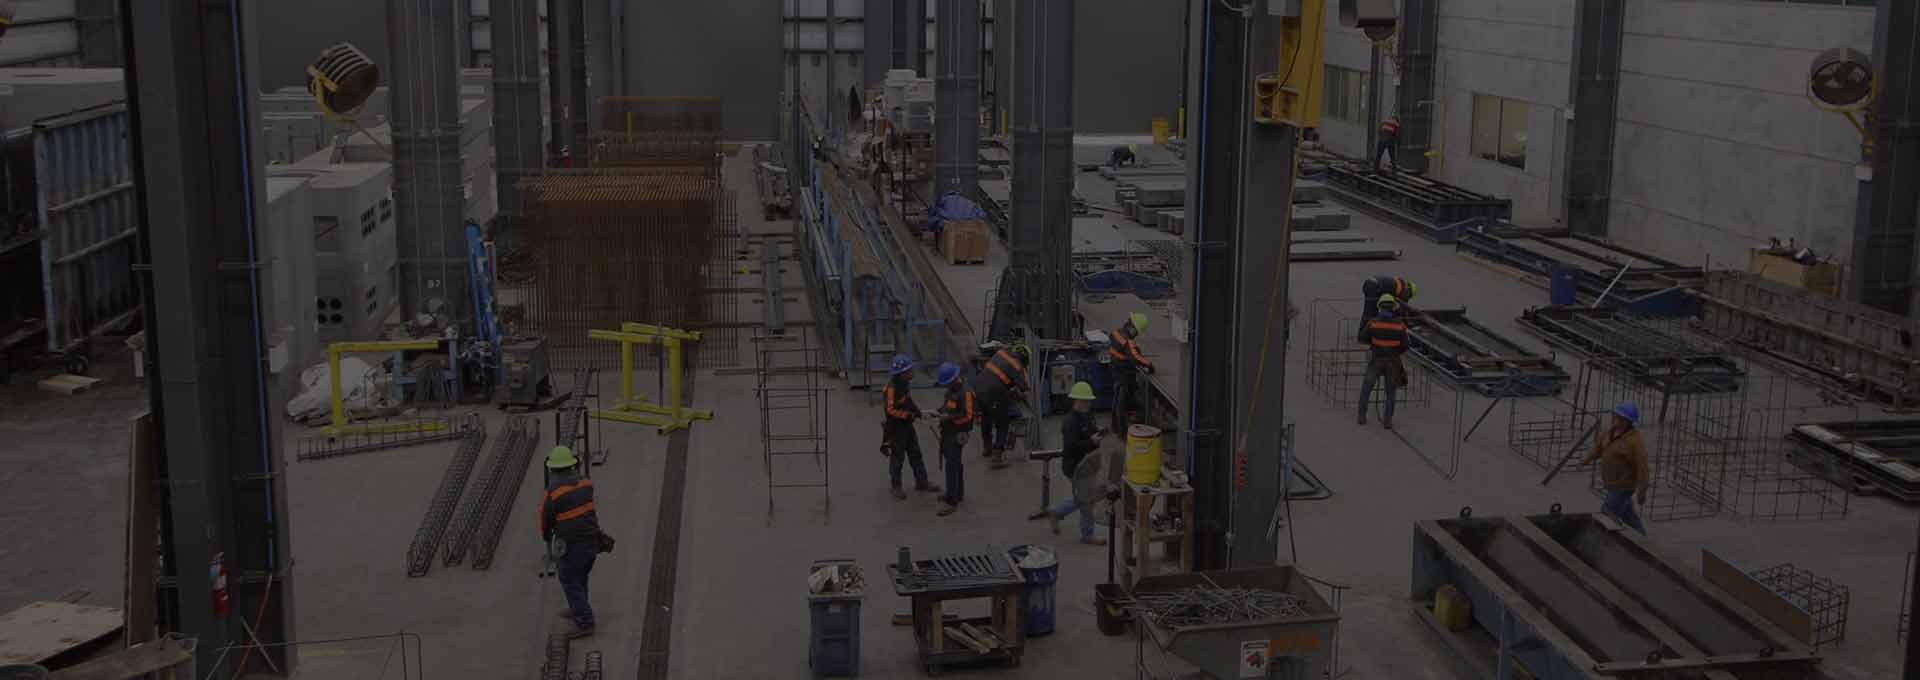 Workers perform various jobs on the floor of a precast concrete plant.